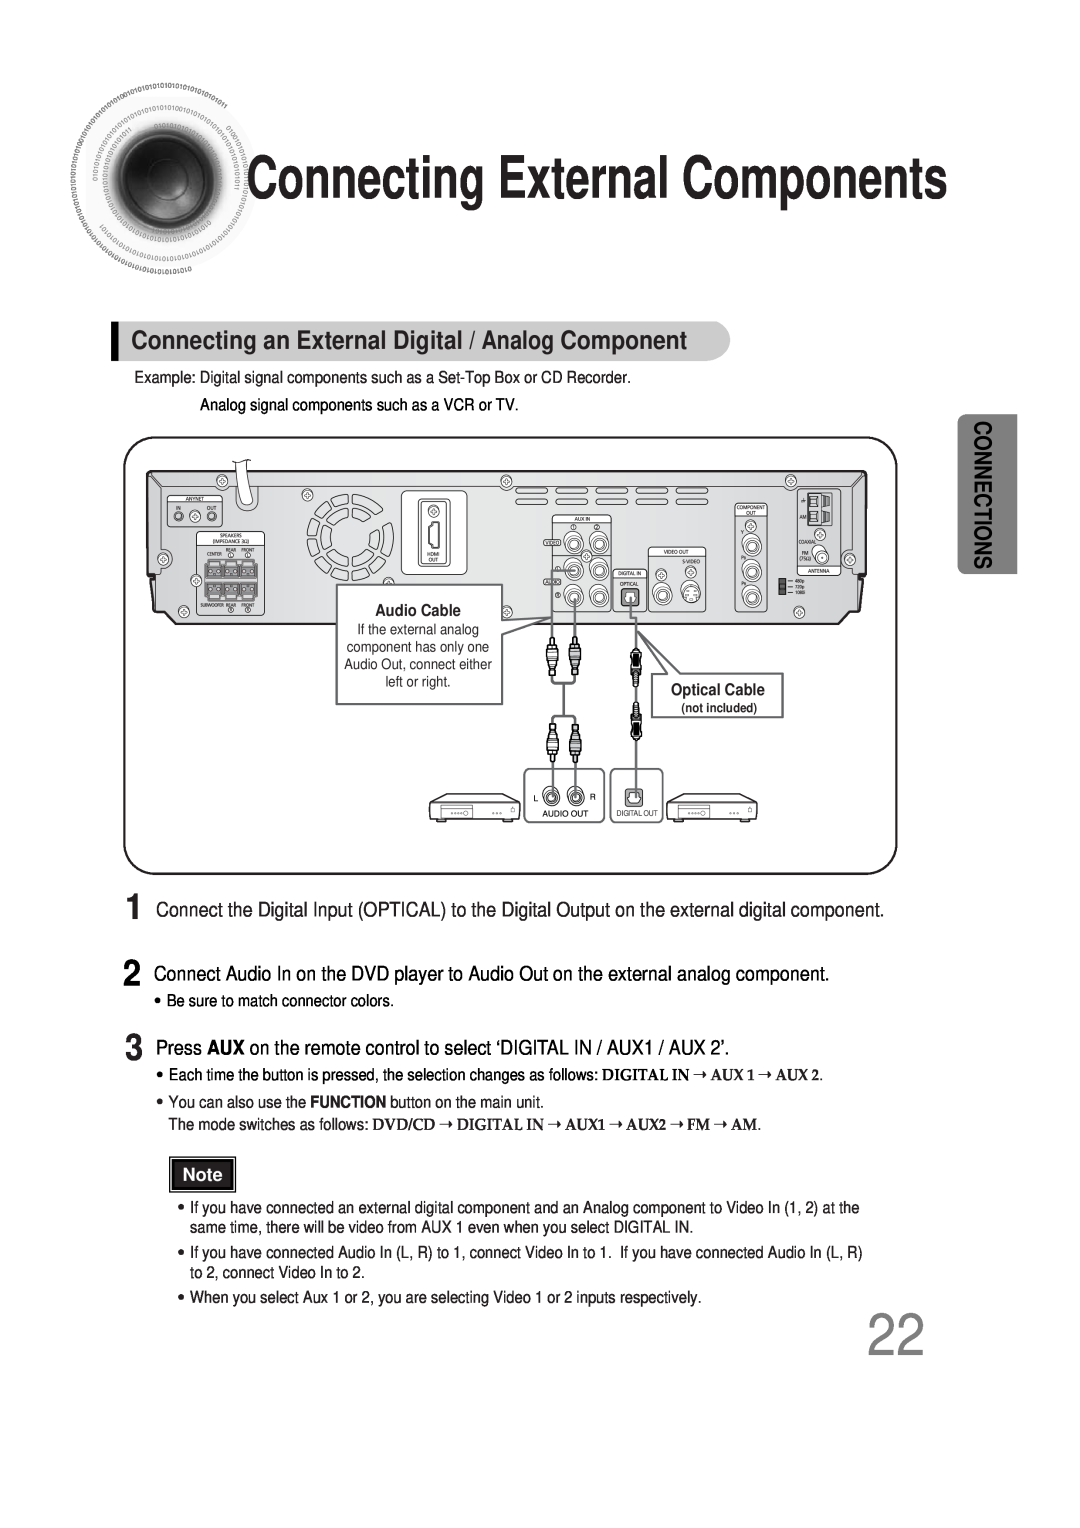 Samsung AH68-01493X Connecting External Components, Connecting an External Digital / Analog Component, Connections 